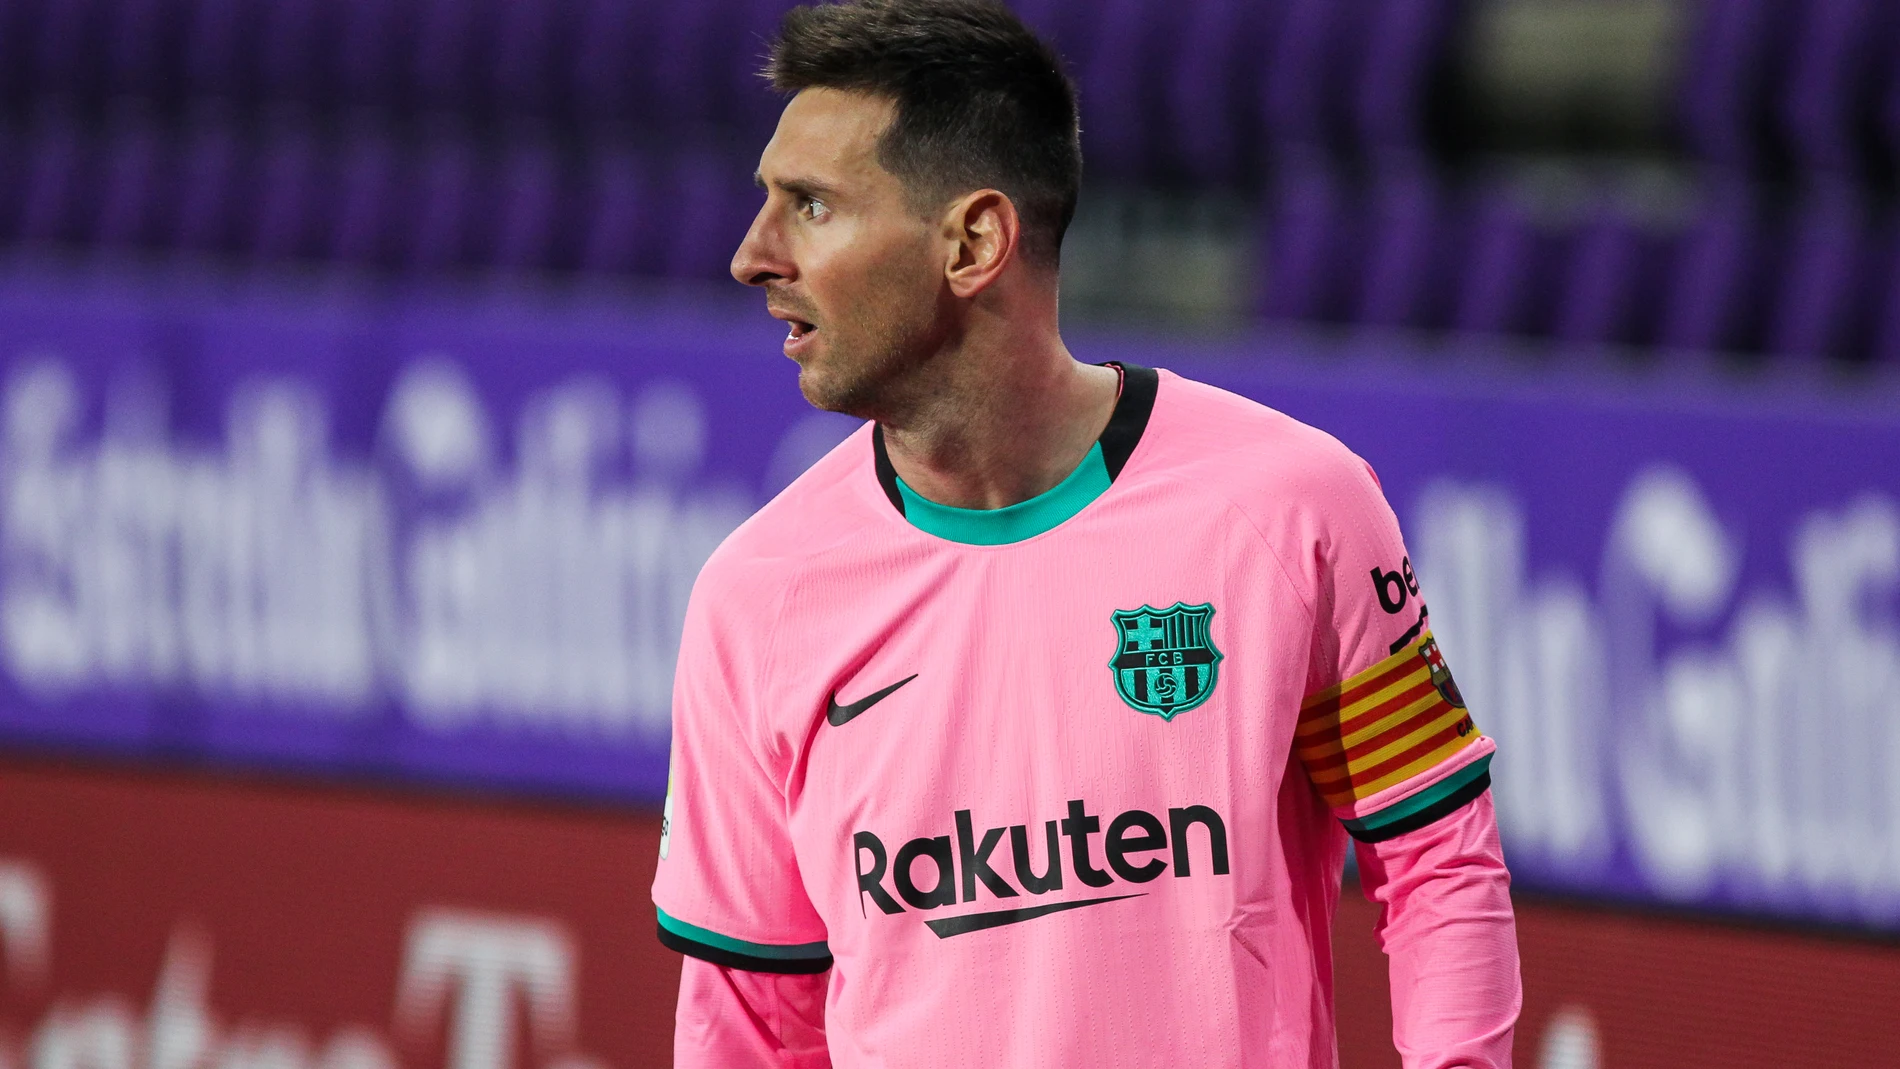 Lionel Messi of FC Barcelona during La Liga football match played between Real Valladolid and FC Barcelona at Jose Zorrilla stadium on December 22, 2020 in Valladolid, Spain.AFP7 22/12/2020 ONLY FOR USE IN SPAIN